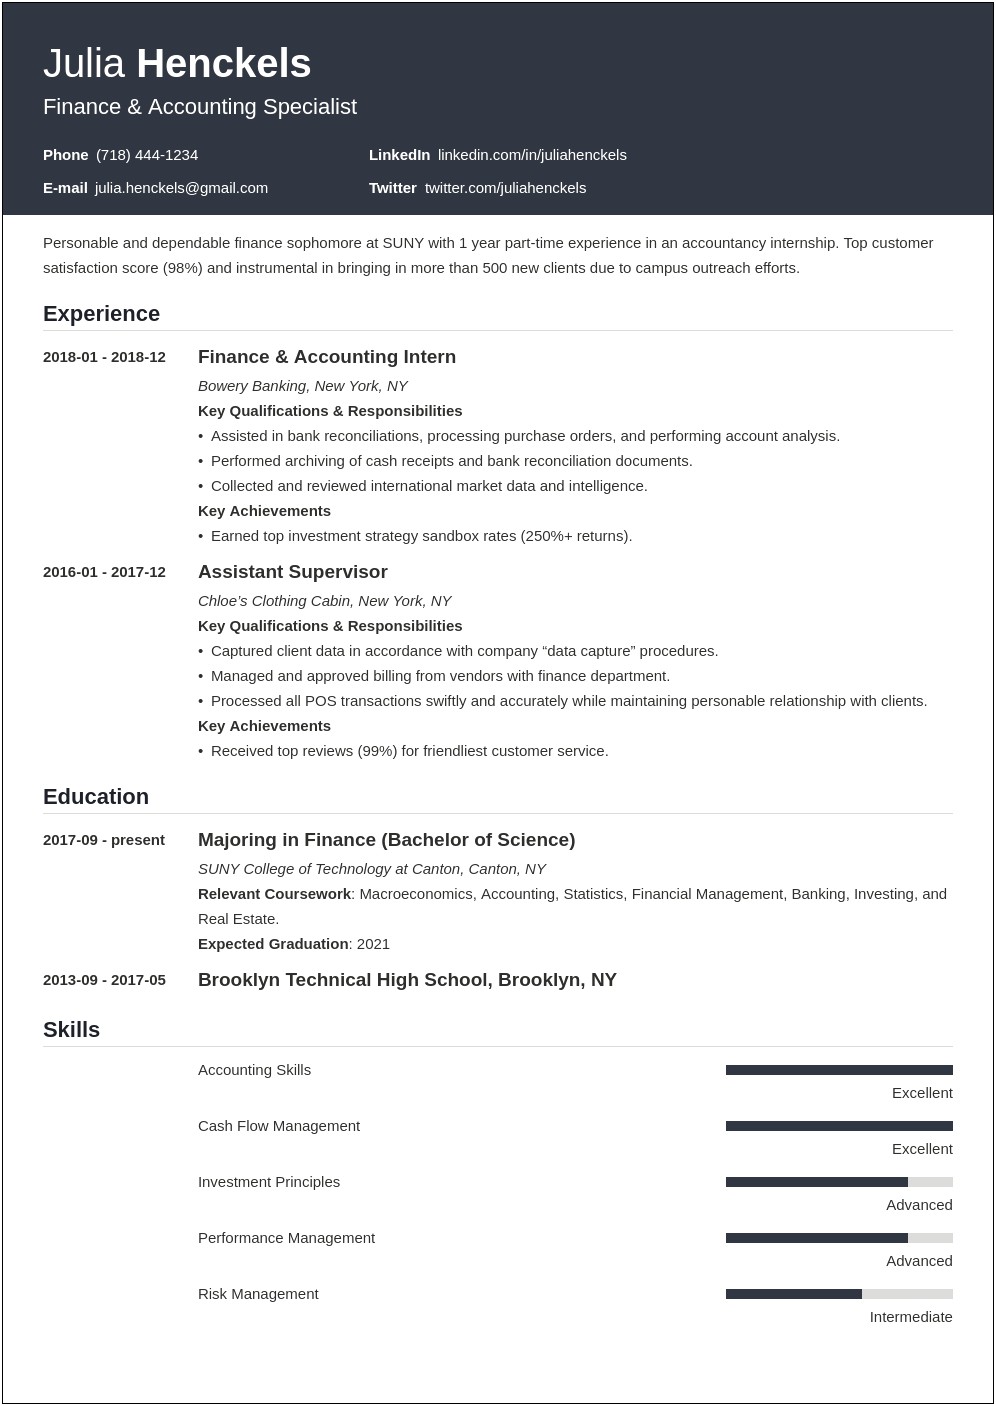 Resume Objective For A College Student